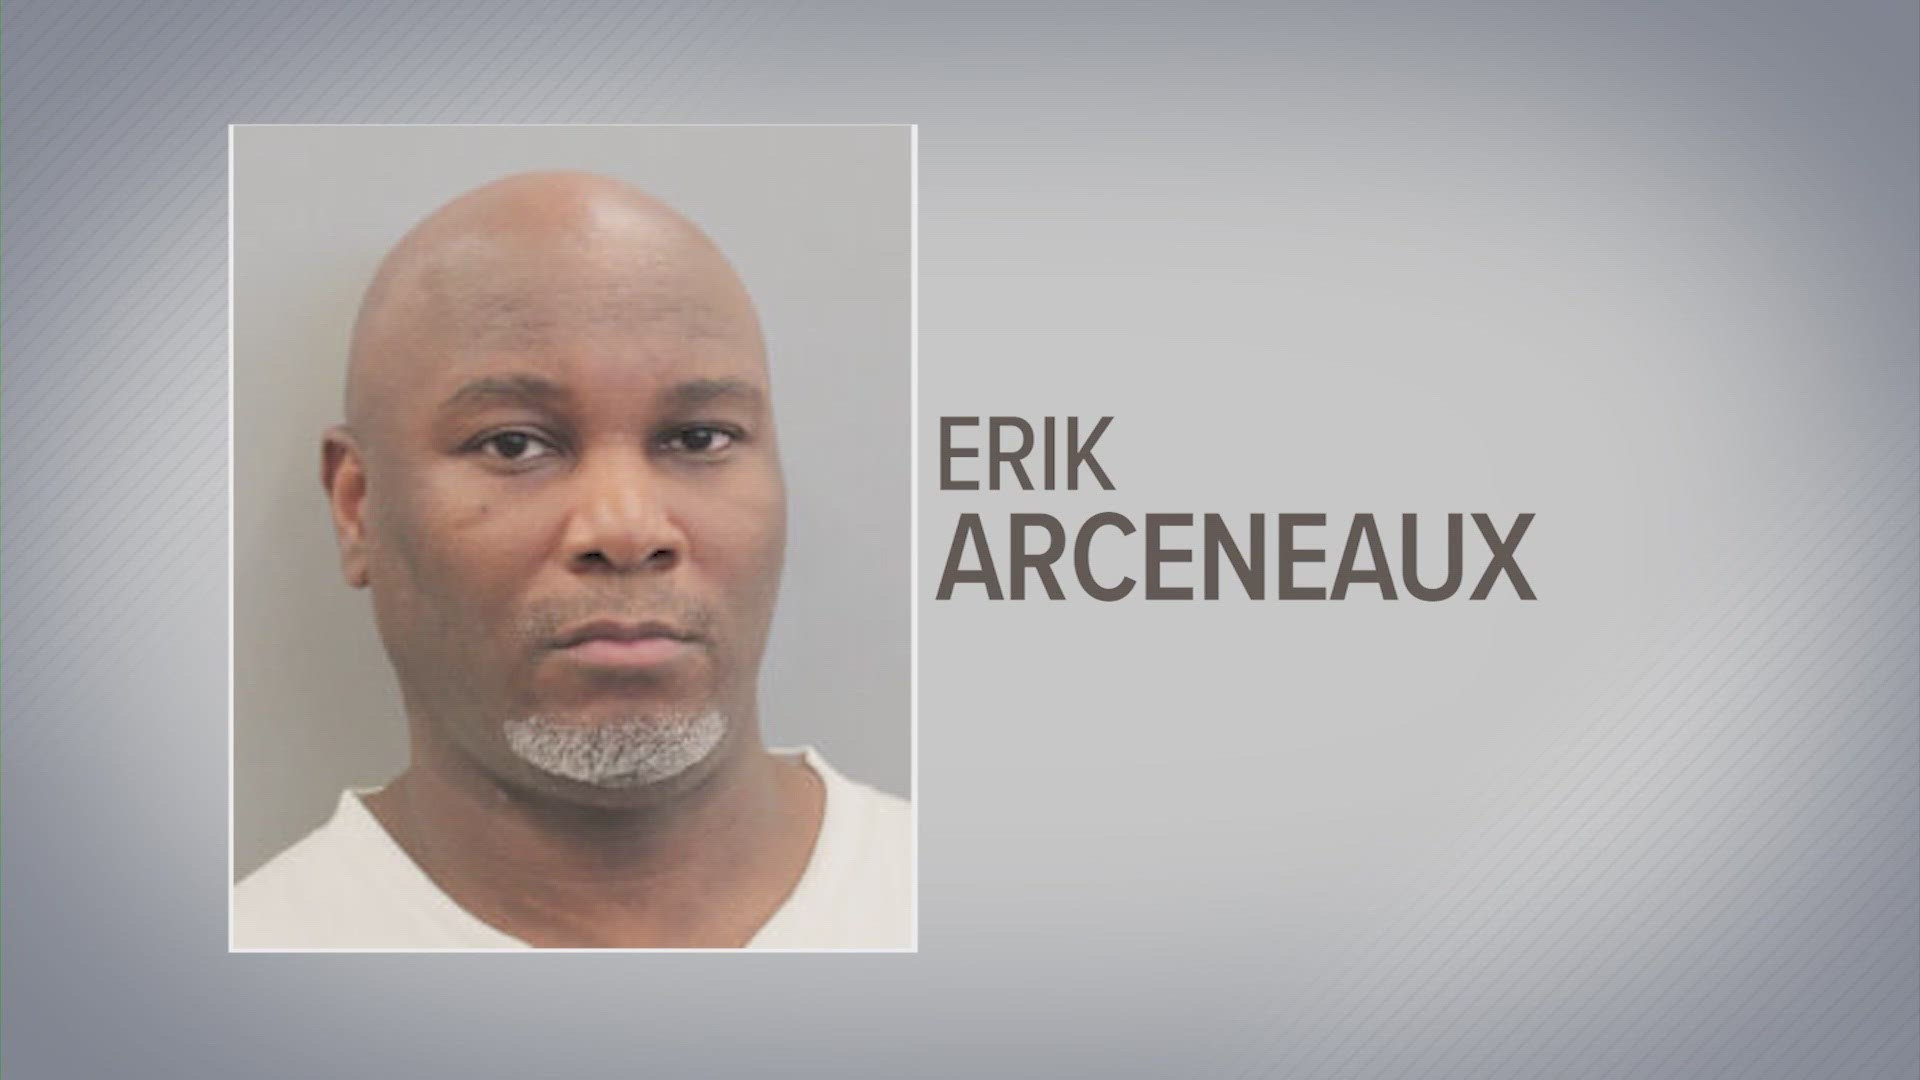 Erik Arceneaux had been wanted since 2019 when he was charged with murder in connection with his missing girlfriend's death. He's now due in court.